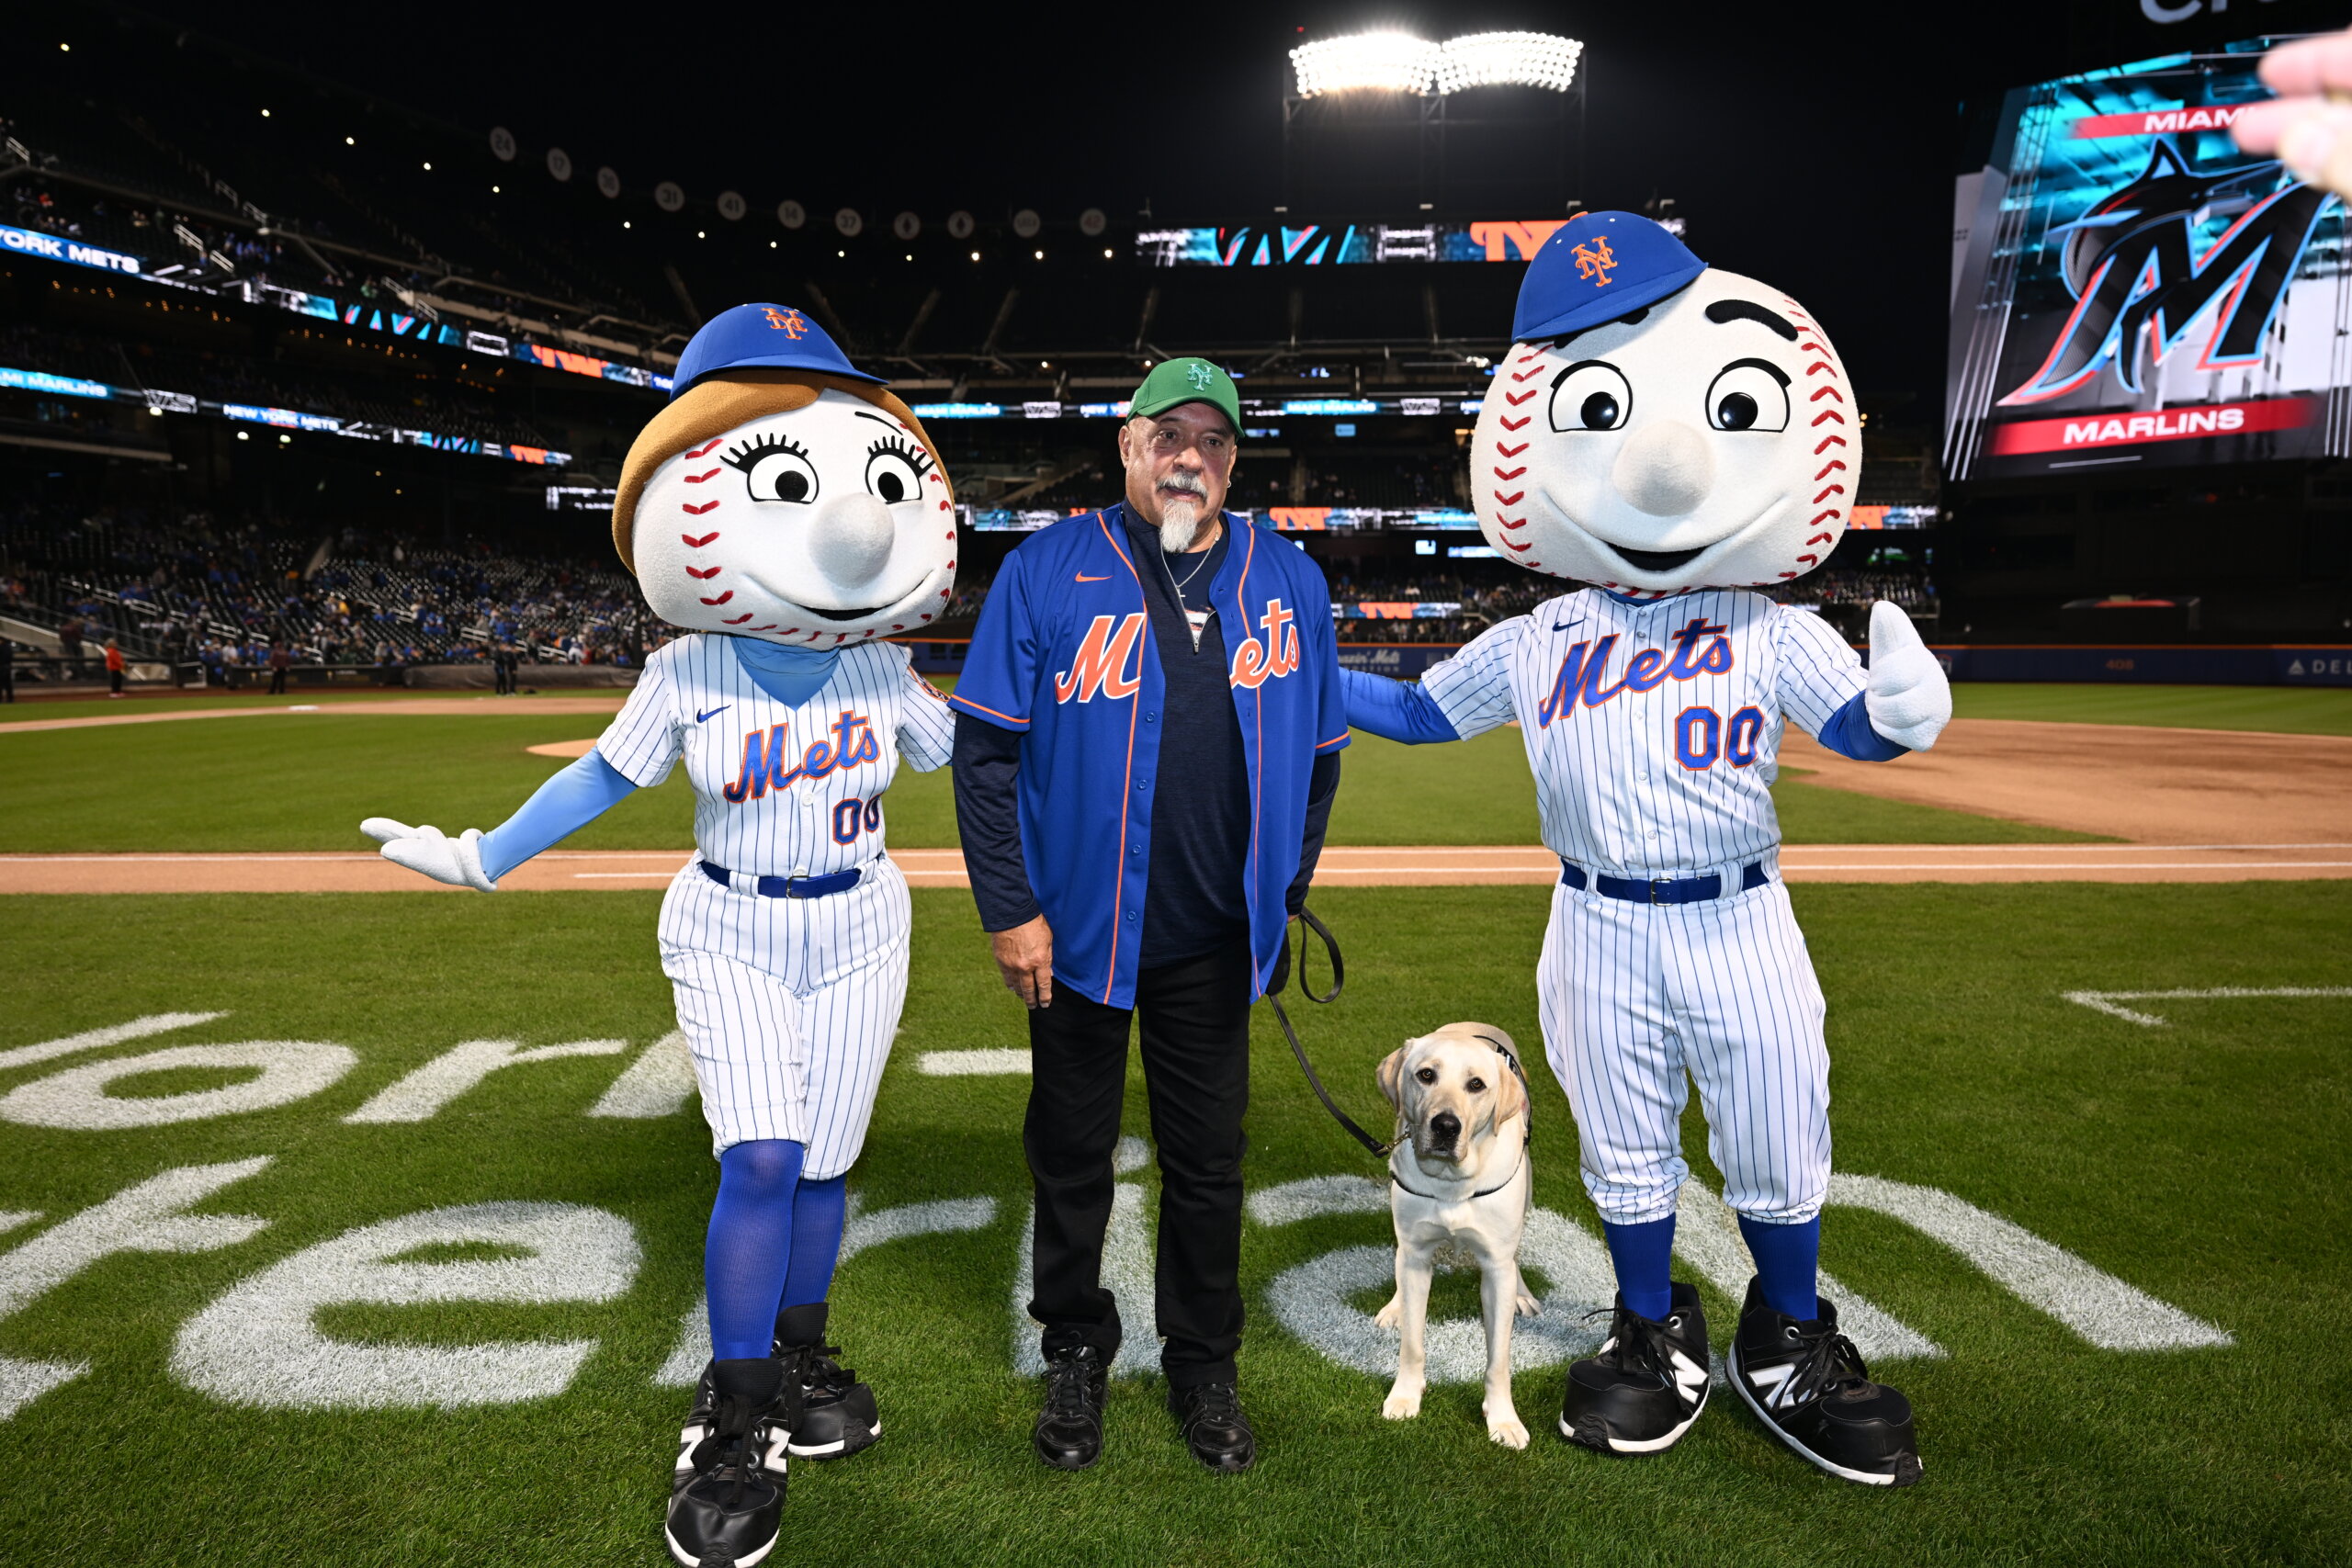 Shea the puppy trains to be a service dog at New York Mets stadium